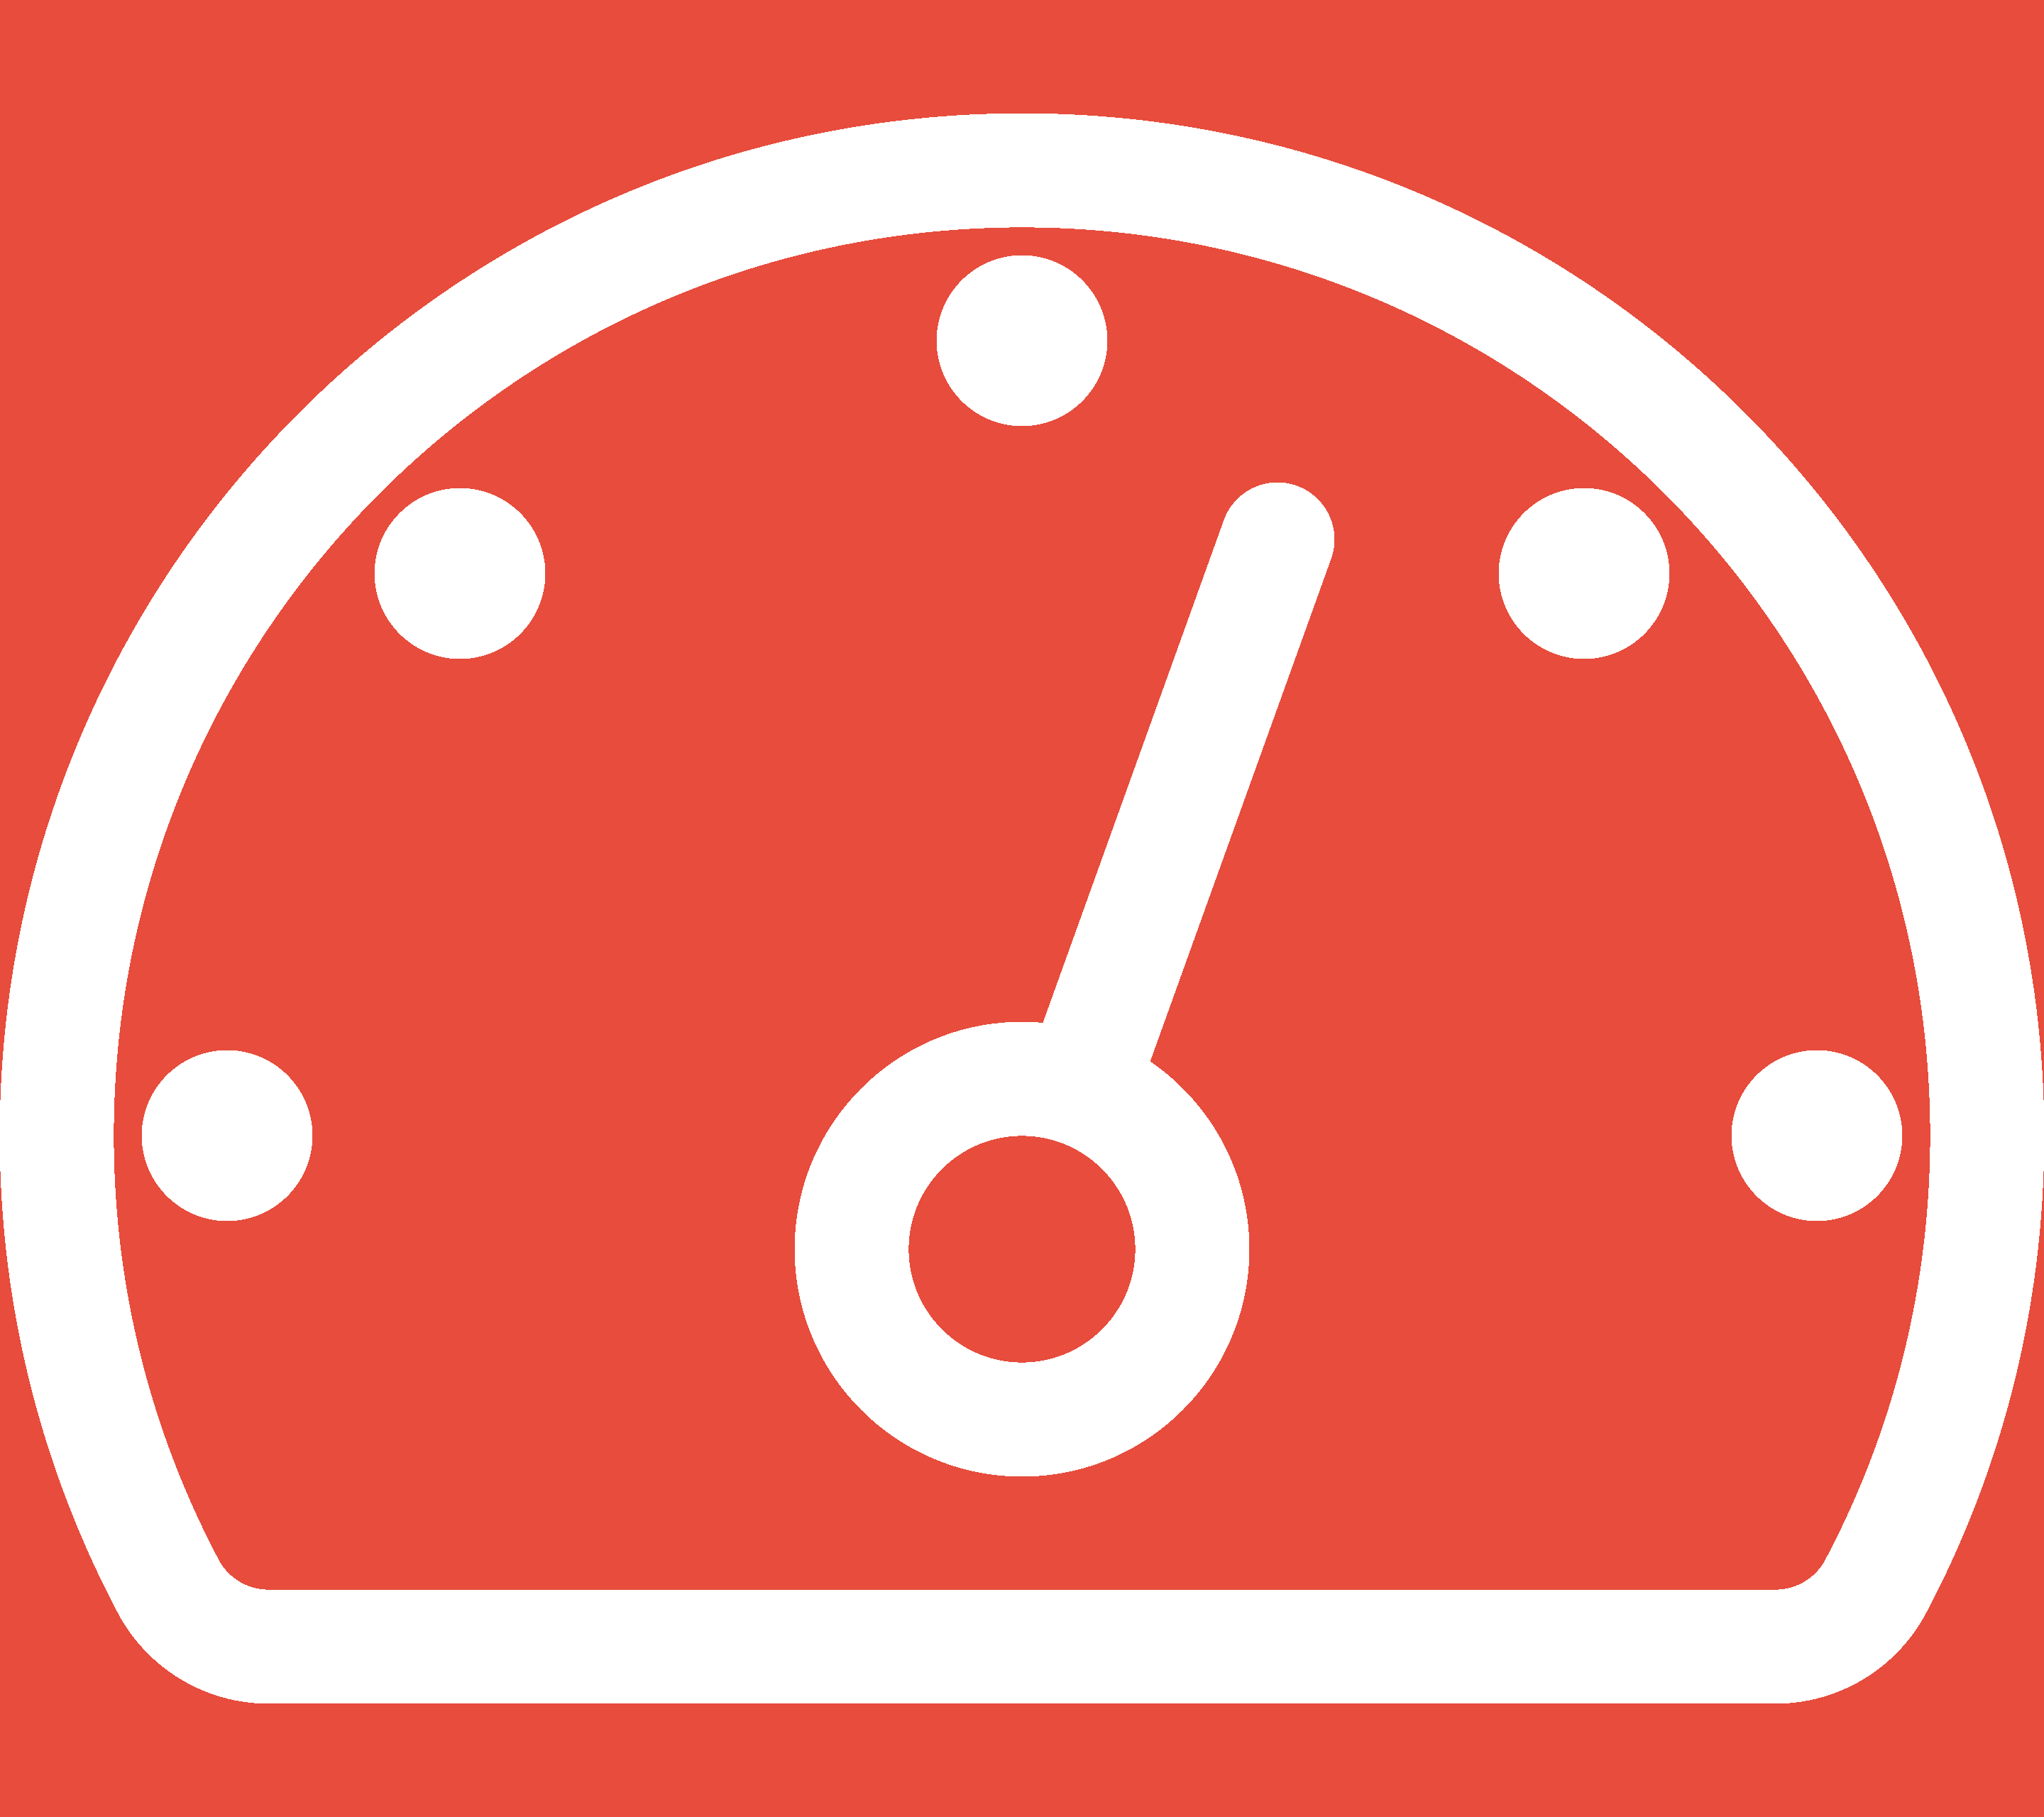 Datei:Tachometer-alt-white-red.png